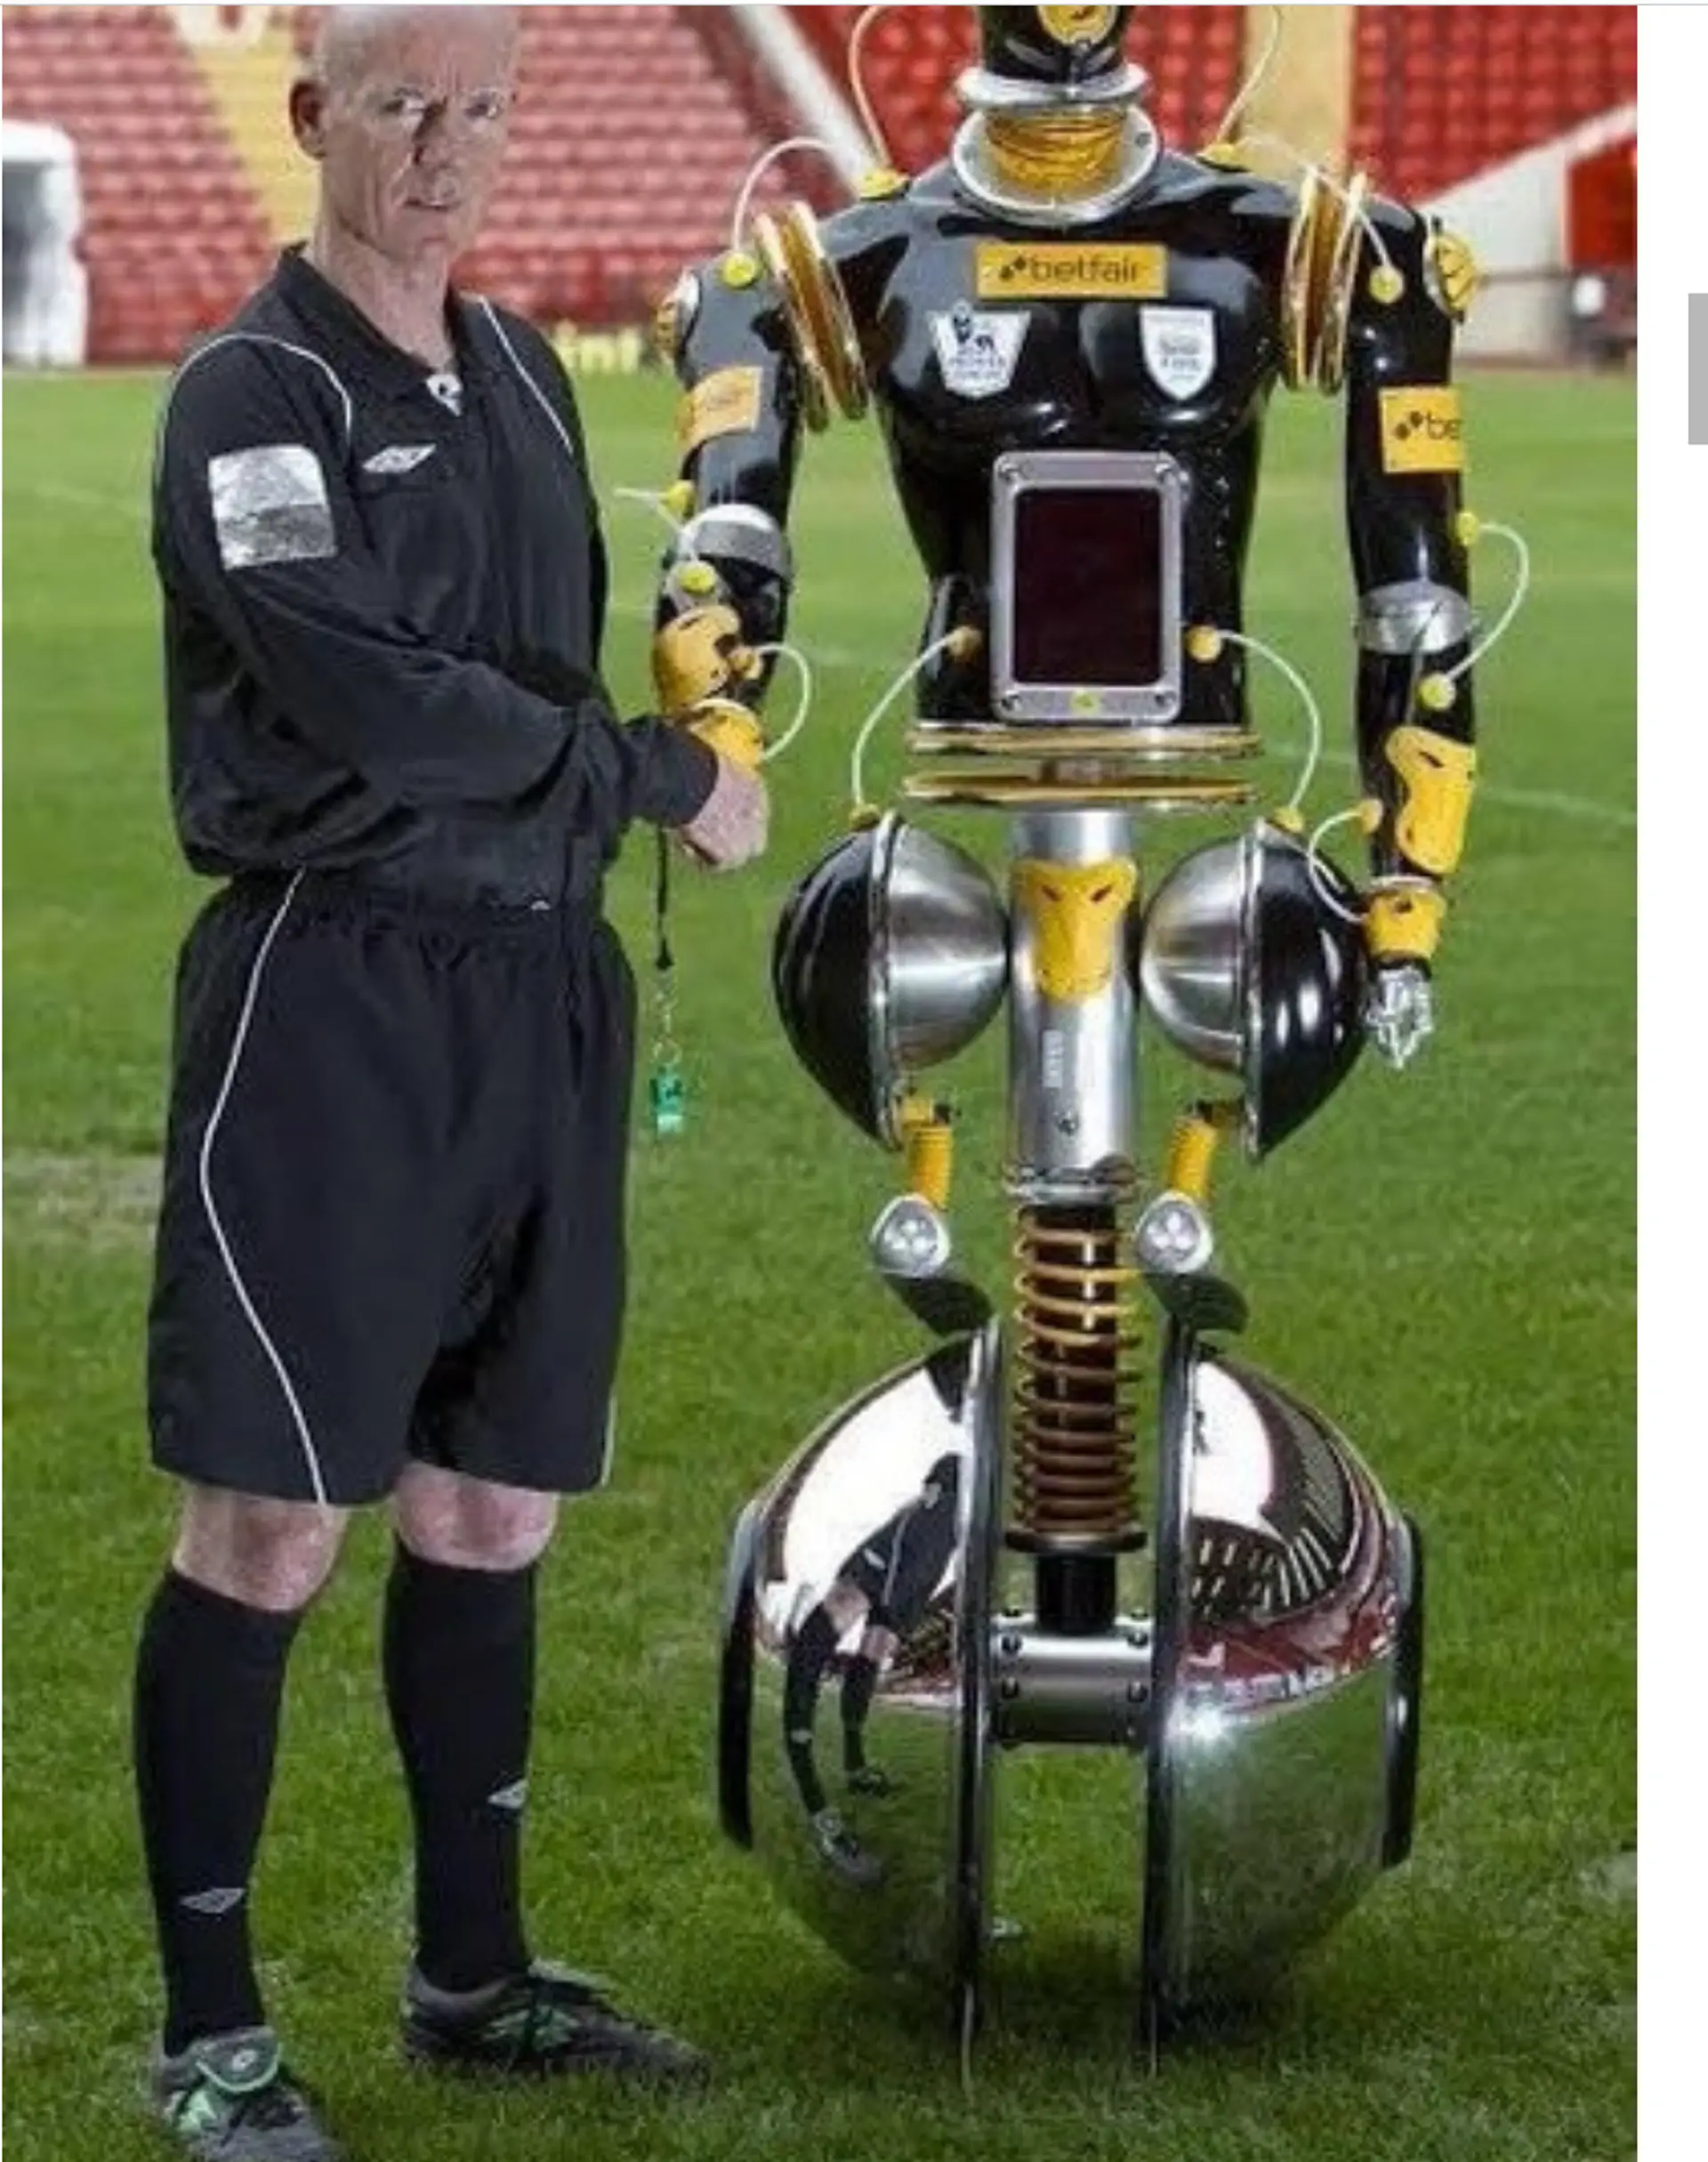 CHELSEA TO EXPERIENCE THE USE OF ROBOT REFEREE AT THE CLUB WORLD CUP